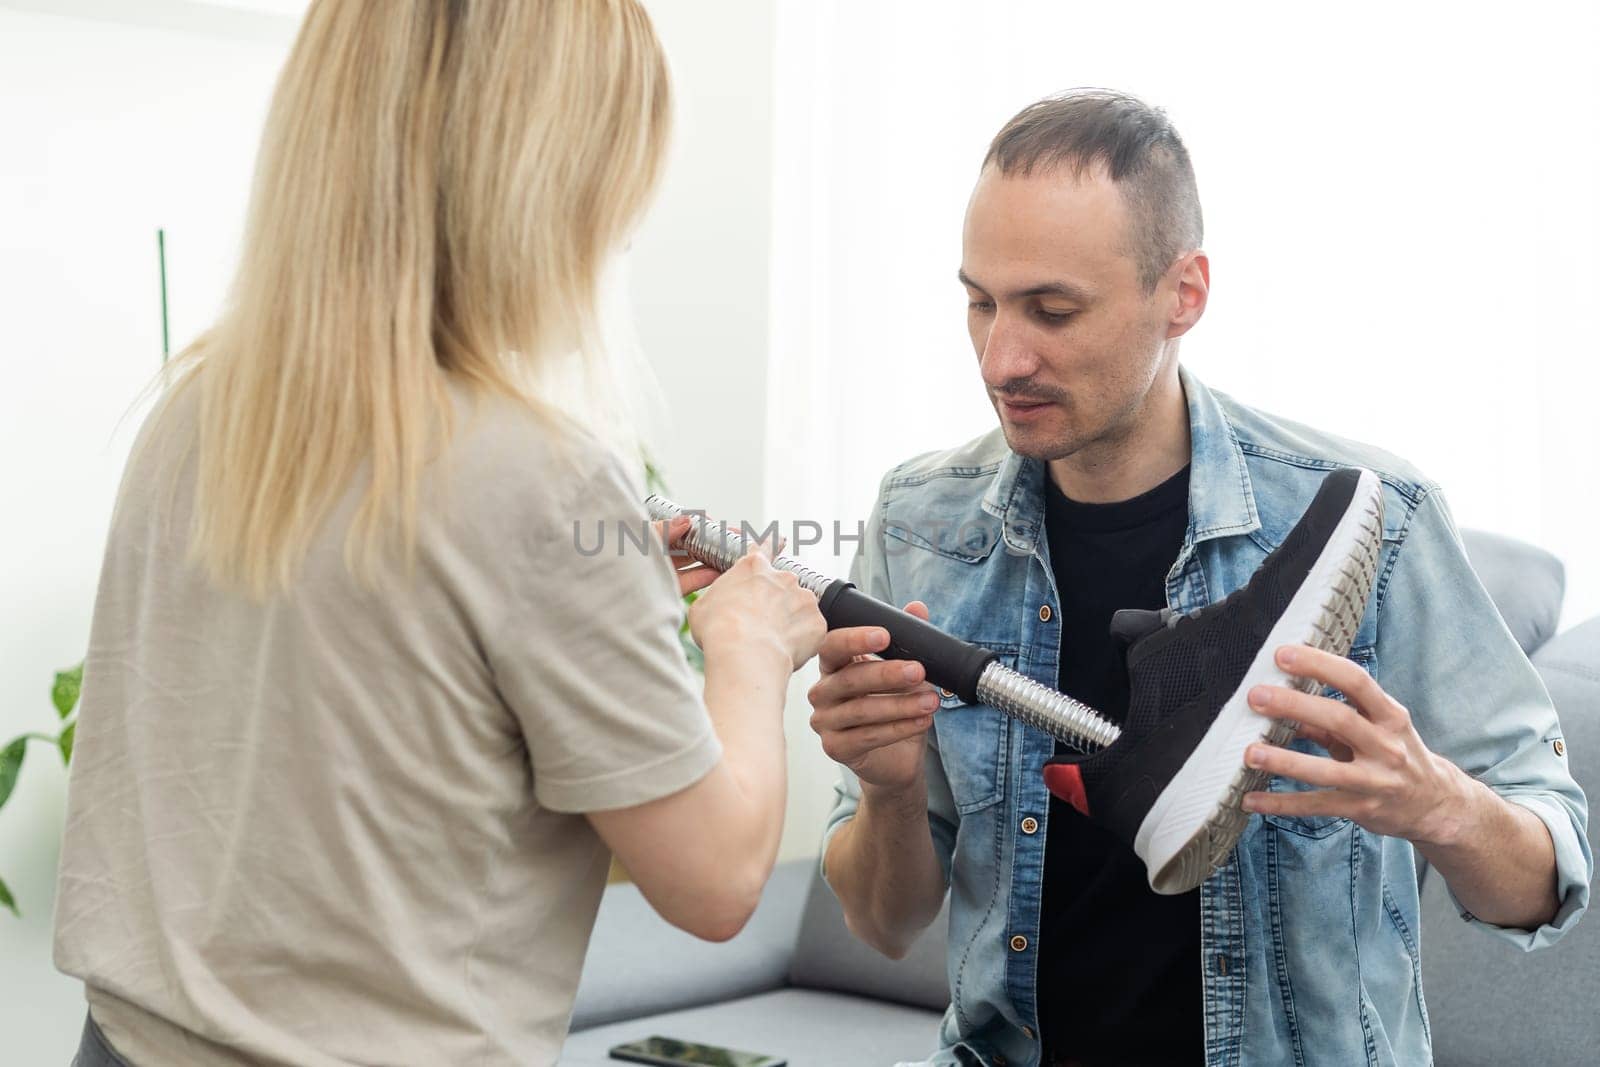 Female physiotherapist adjusting prosthetic leg of patient in hospital. High quality photo